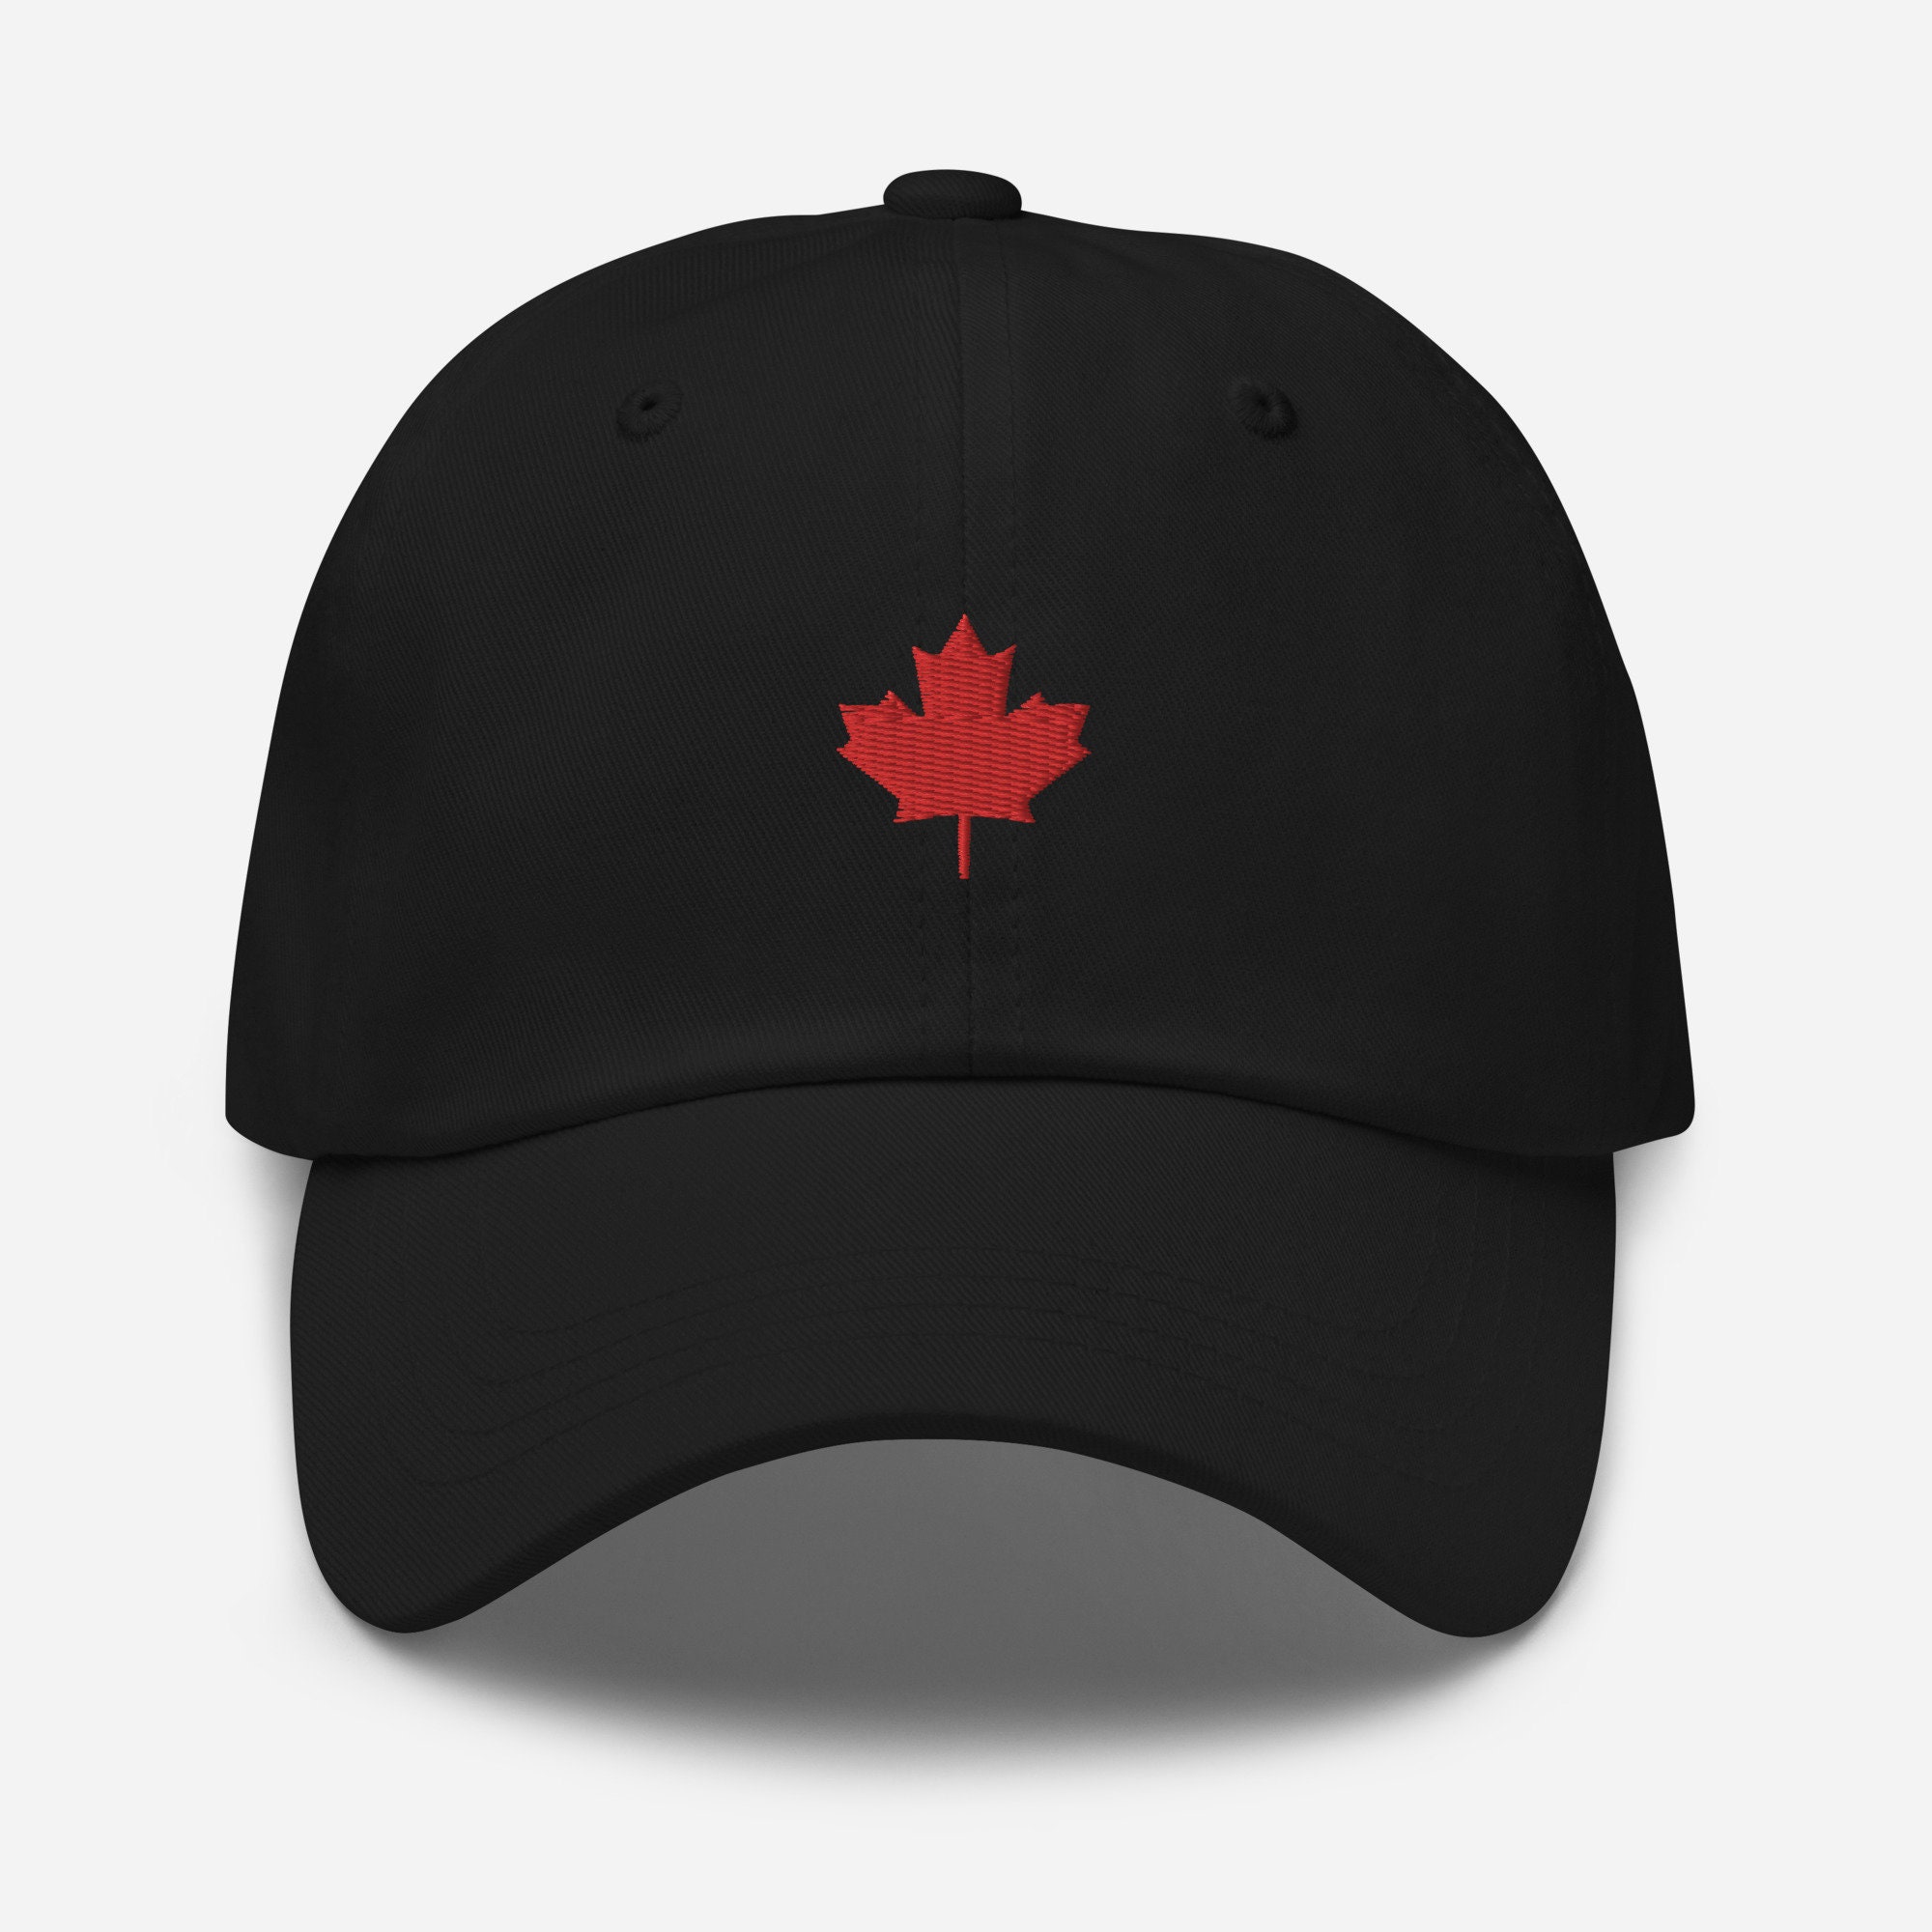 Maple Leaf Brooch Maple Leaf Hat Pin Maple Leaf Jewelry Leaves